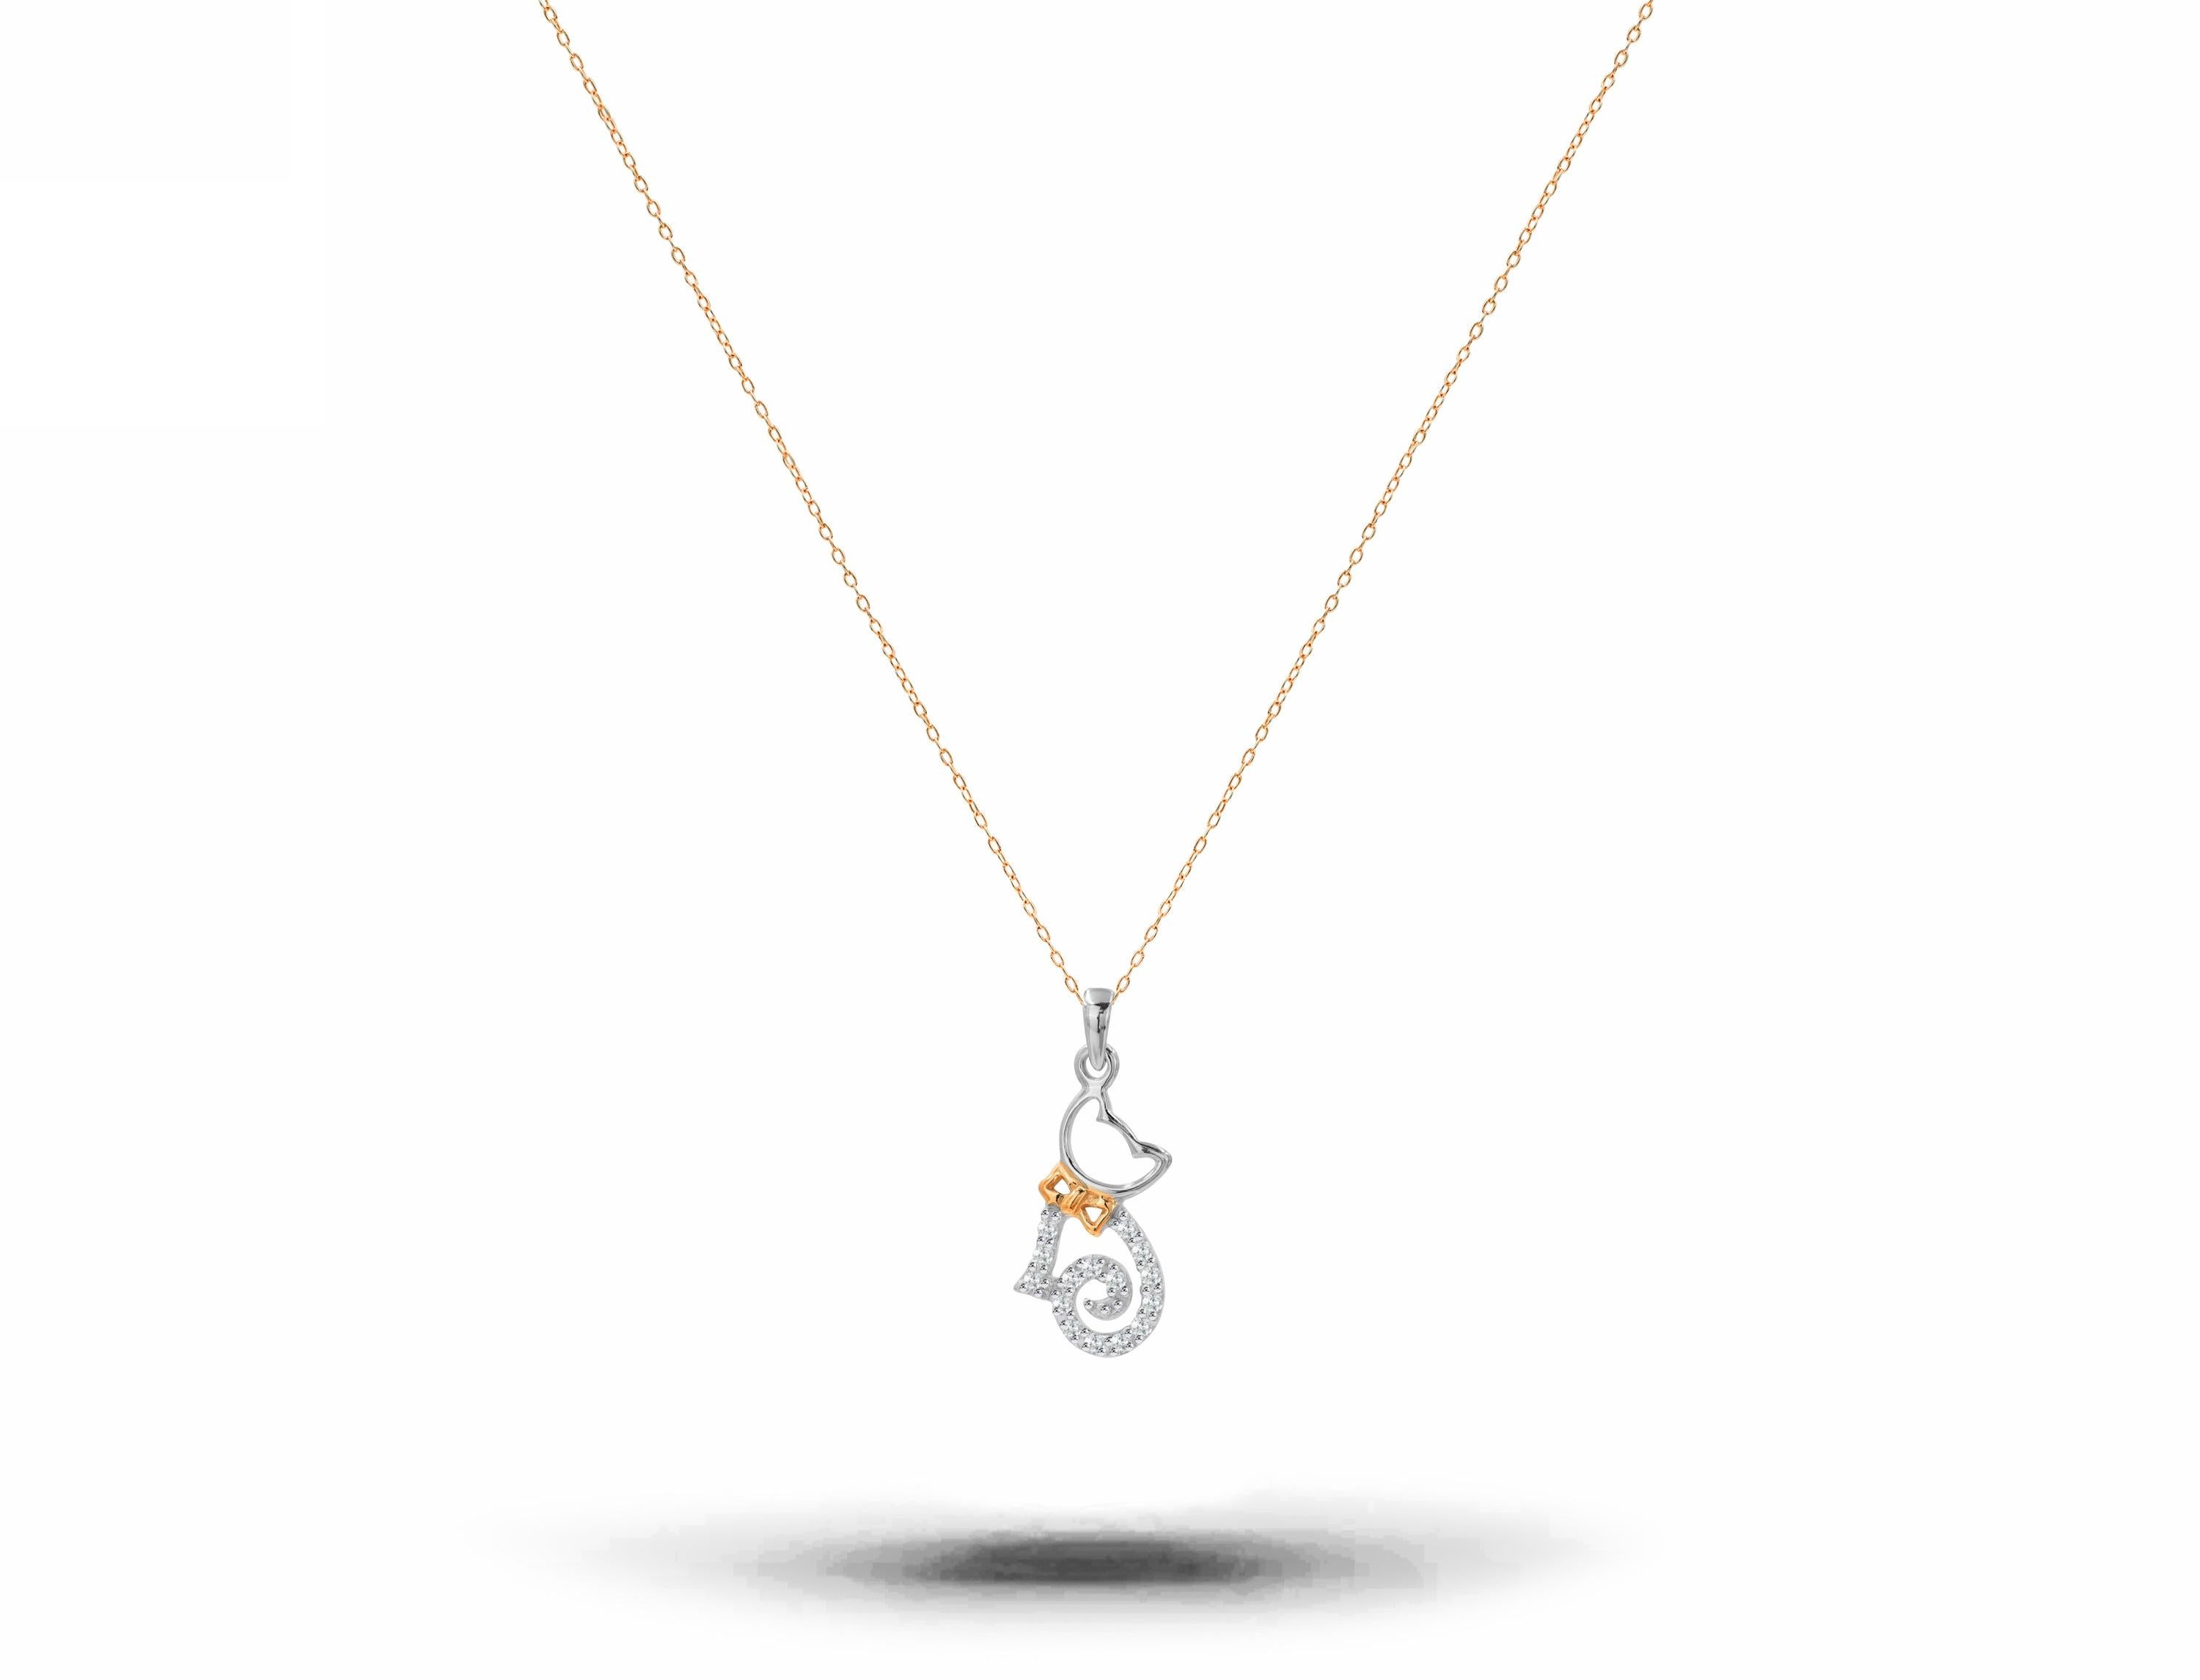 Diamond Cat Charm Necklace is made of 14k White and Rose Gold.

Natural genuine round cut diamond each diamond is hand selected by me to ensure quality and set by a master setter in our studio. Diamond charm attached to a dainty gold chain it would